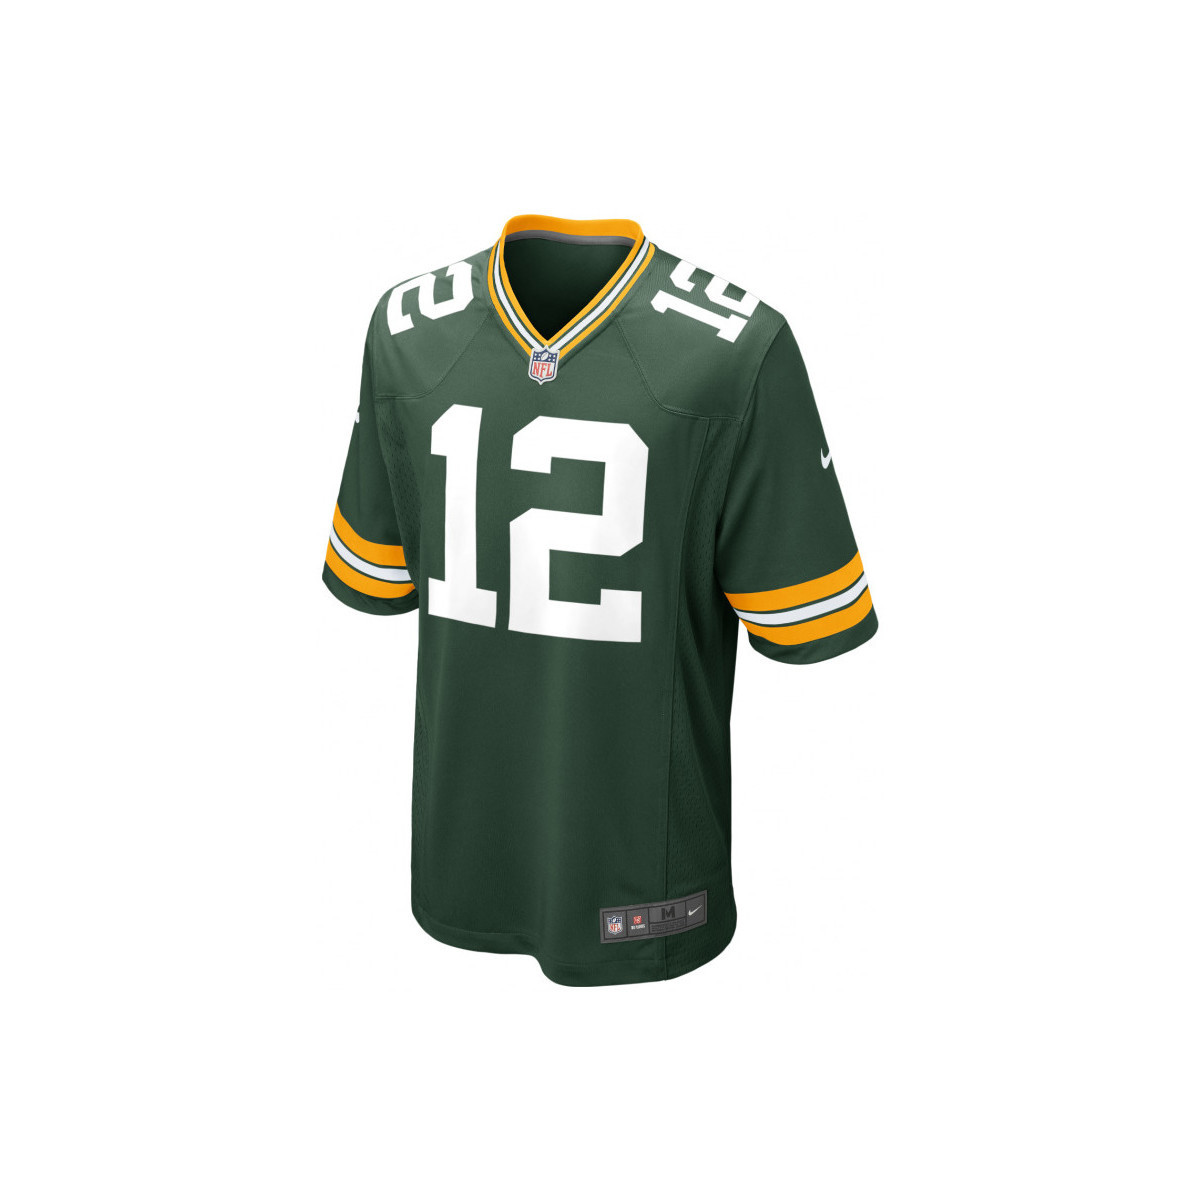 Vêtements T-shirts manches courtes Nike Maillot NFL Aaron Rodgers Gree Multicolore